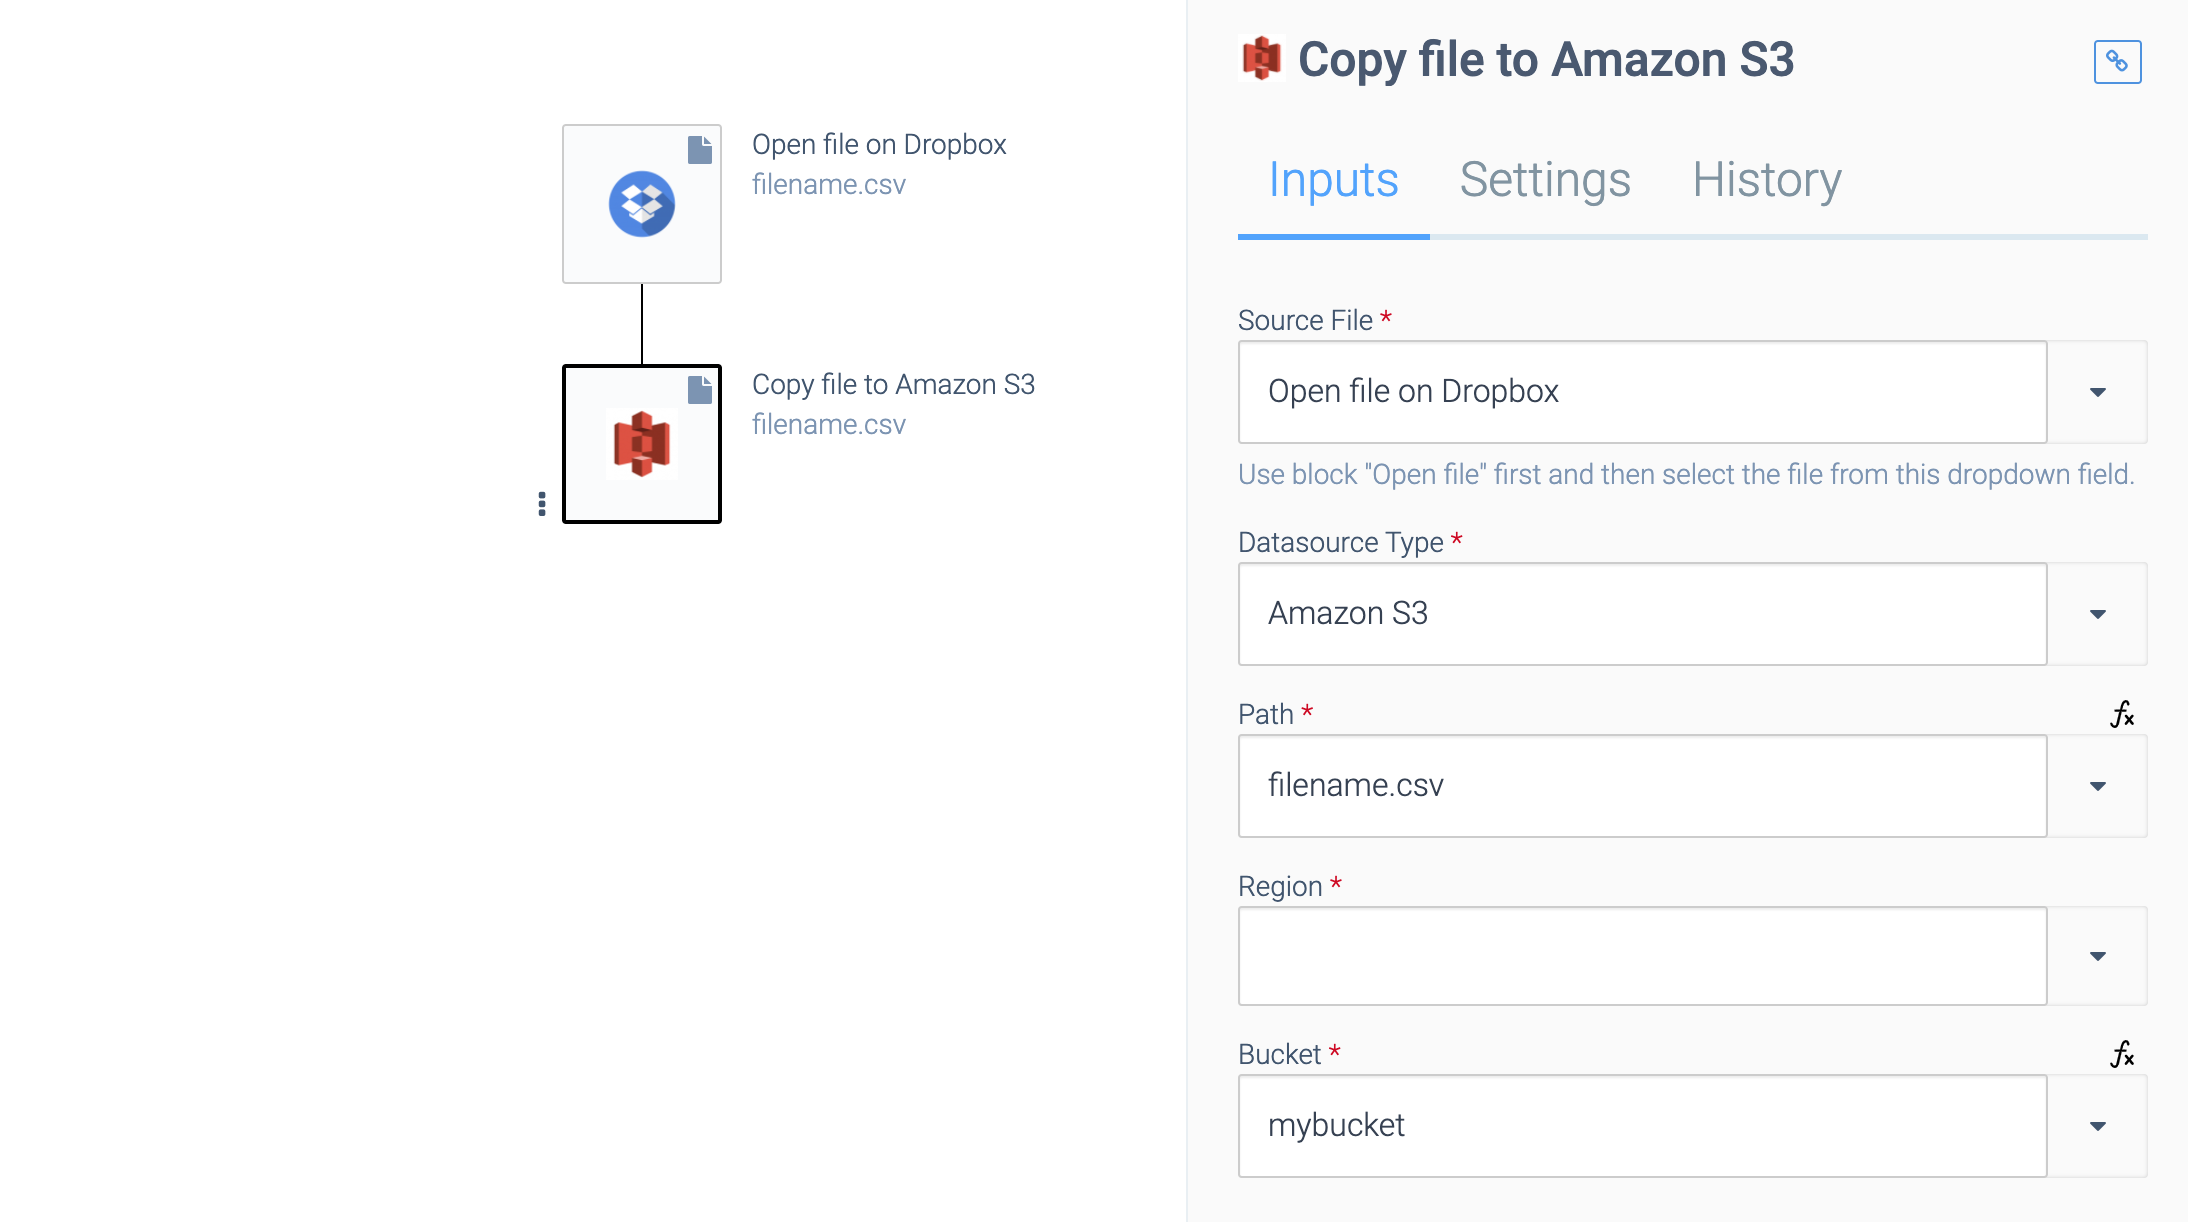 an automation consisting of an Open file on Dropbox block and a Copy file to Amazon S3 block.